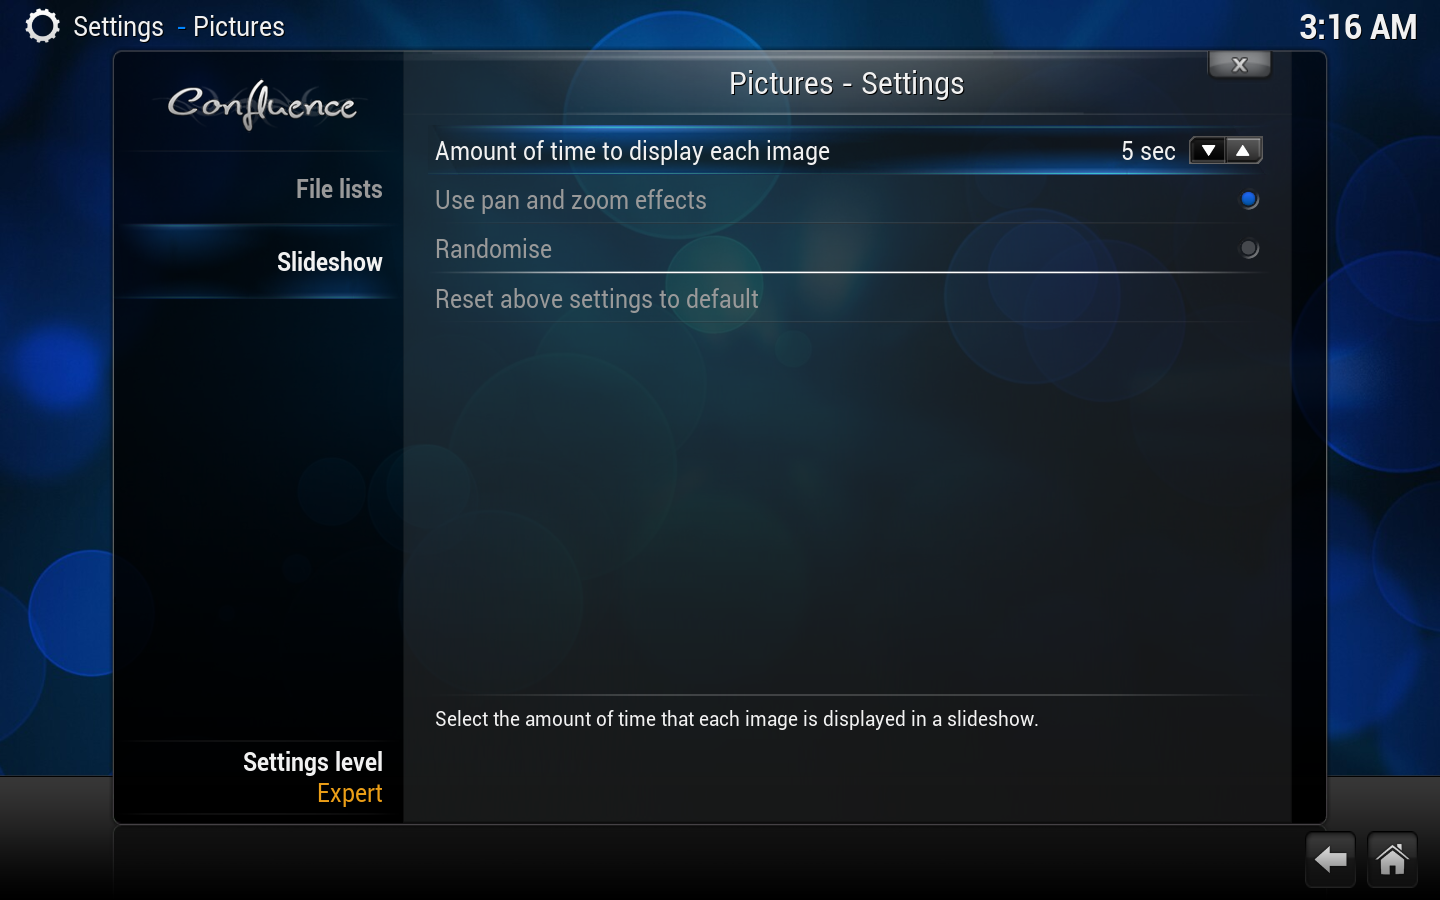 File:Settings.pictures.slideshow.png